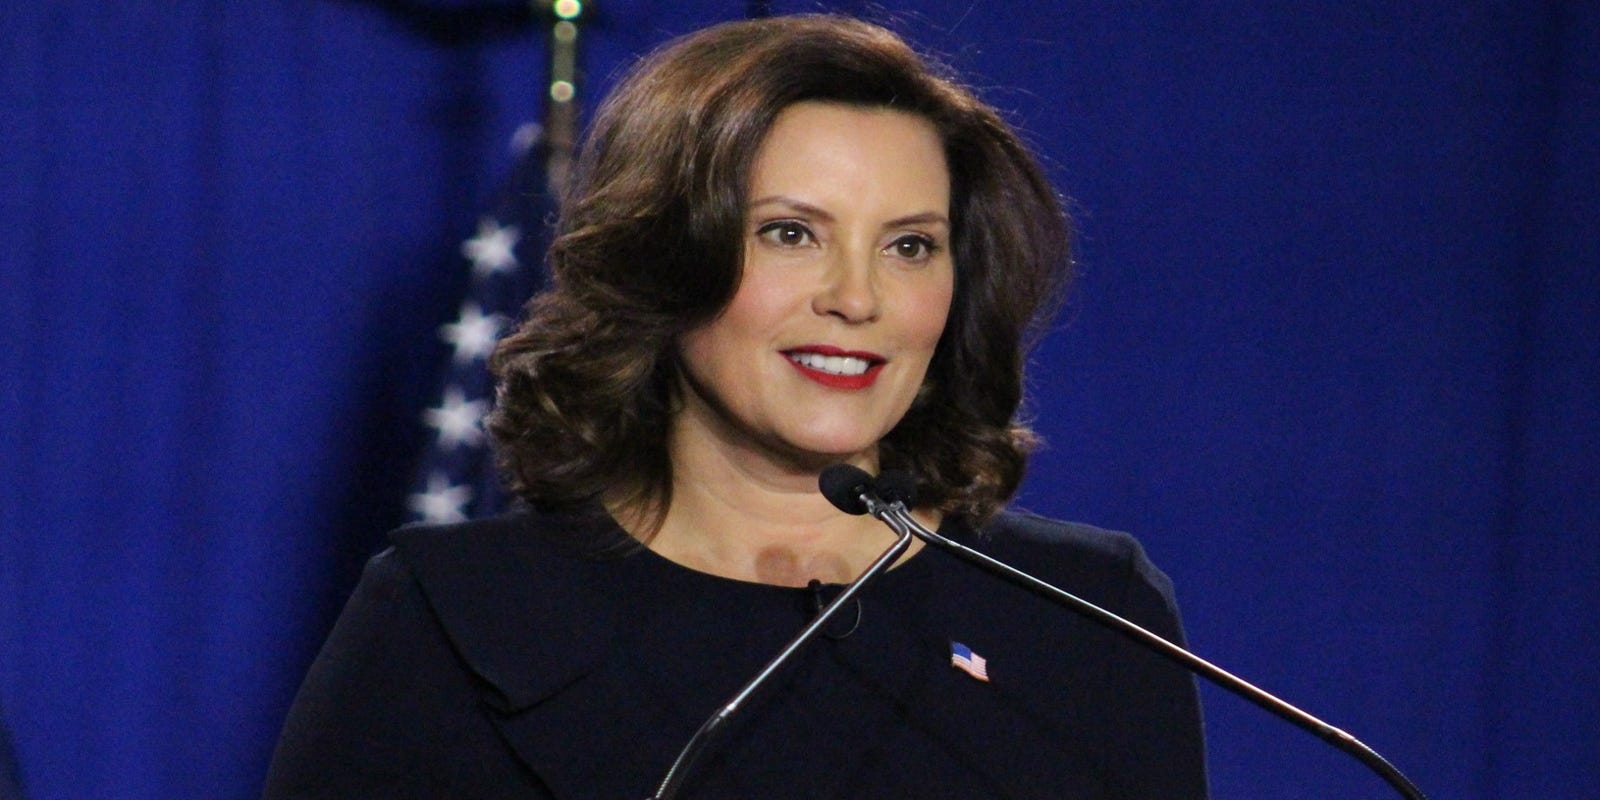 Whitmer urges Mich. residents to stay home, defends no lockdown order